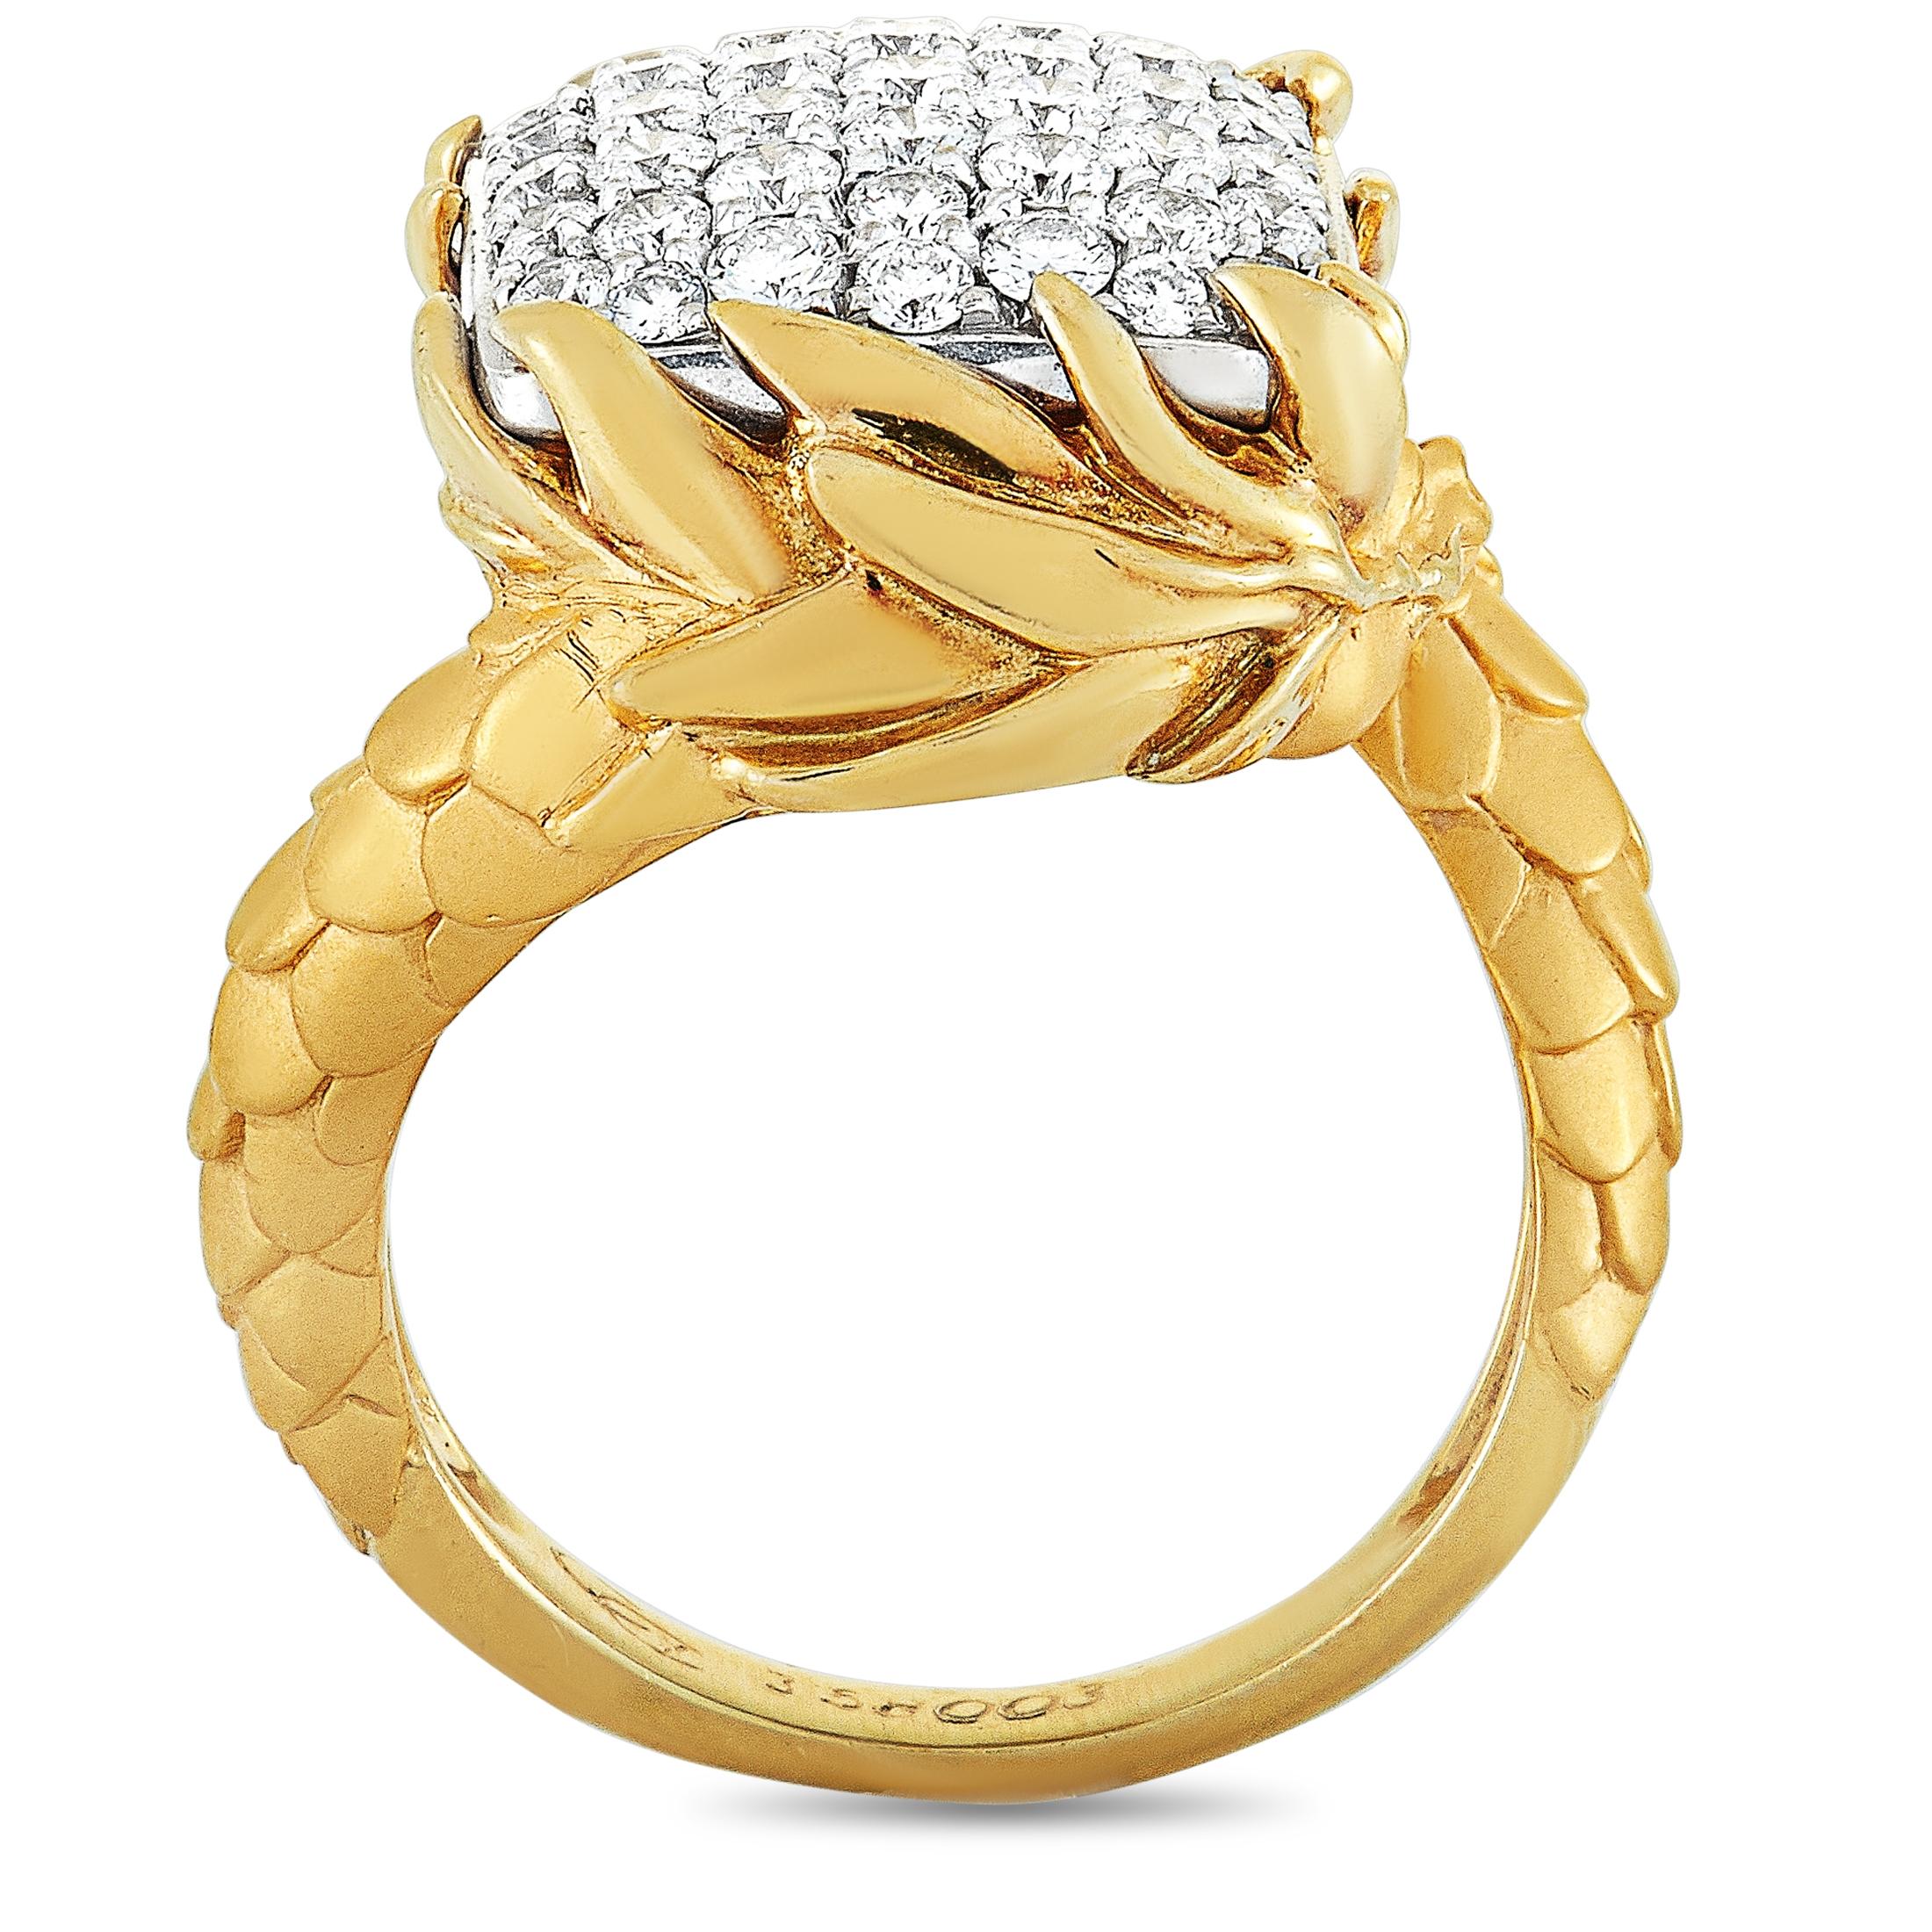 This Carrera y Carrera ring is made out of 18K yellow and white gold and weighs 14 grams. It boasts band thickness of 3 mm and top height of 9 mm, while top dimensions measure 15 by 20 mm. The ring is set with diamonds that amount to 1.25 carats.
 
